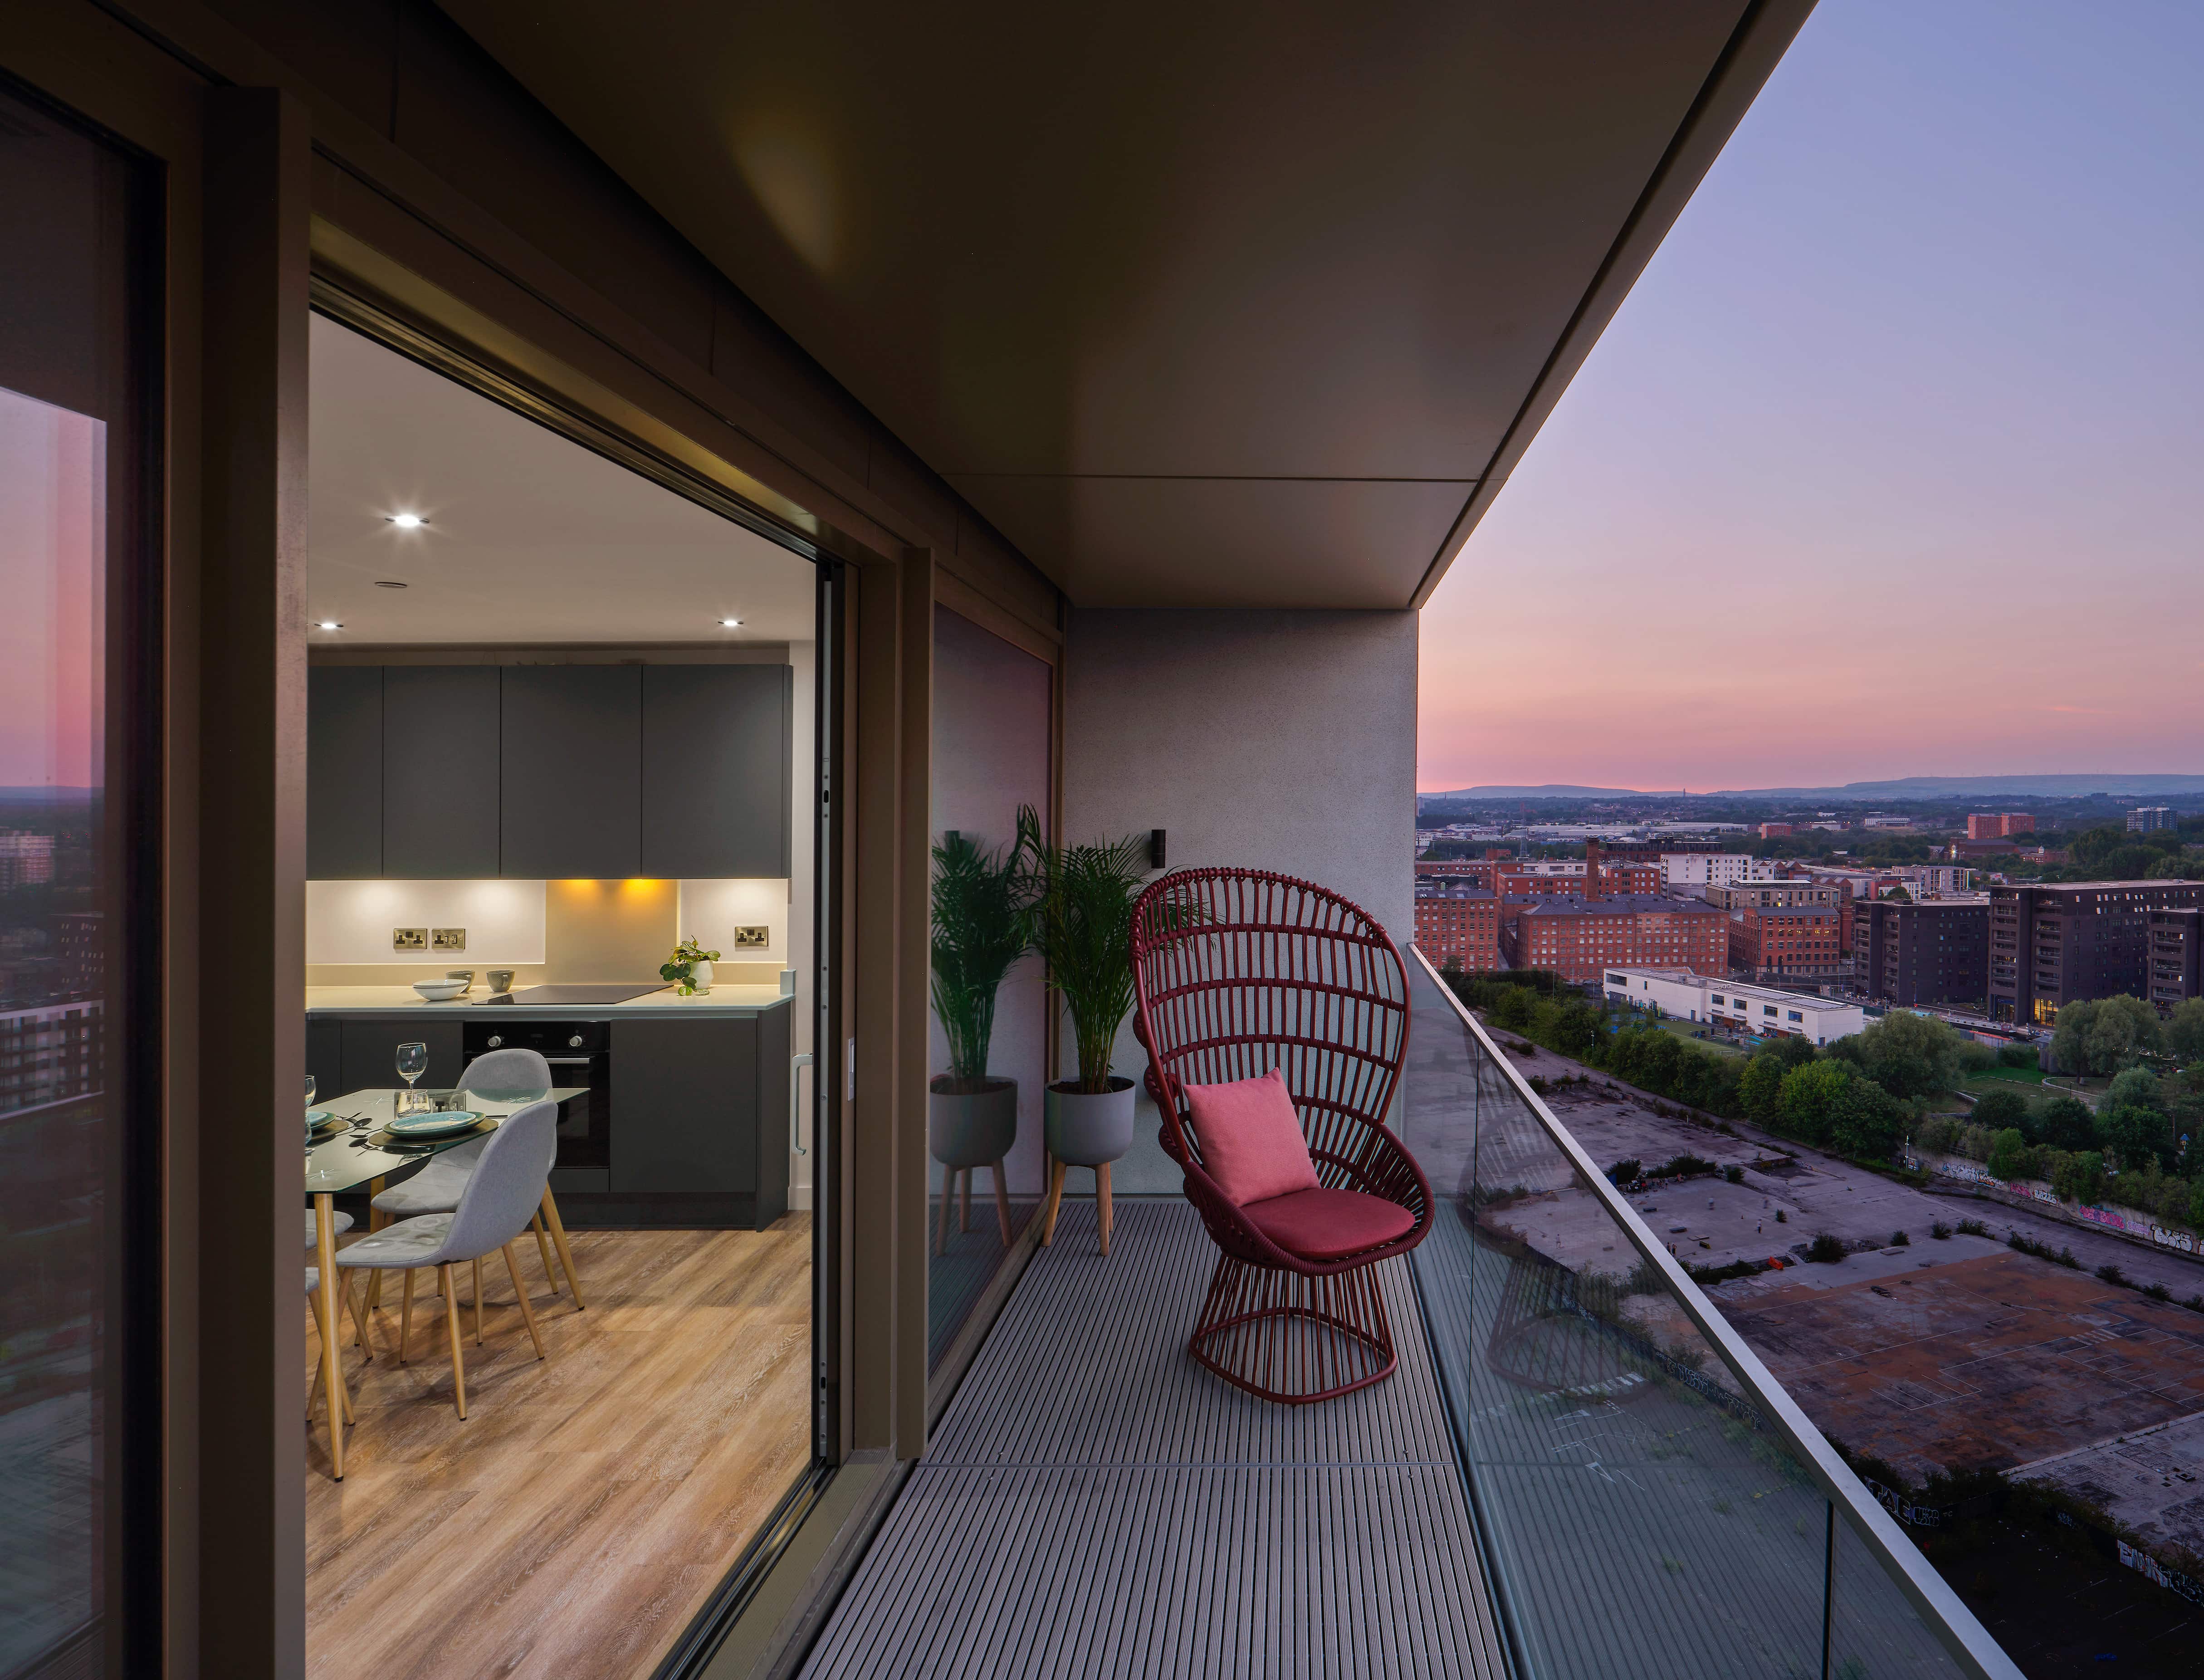 The ultimate apartment amenity: why a balcony is a must-have